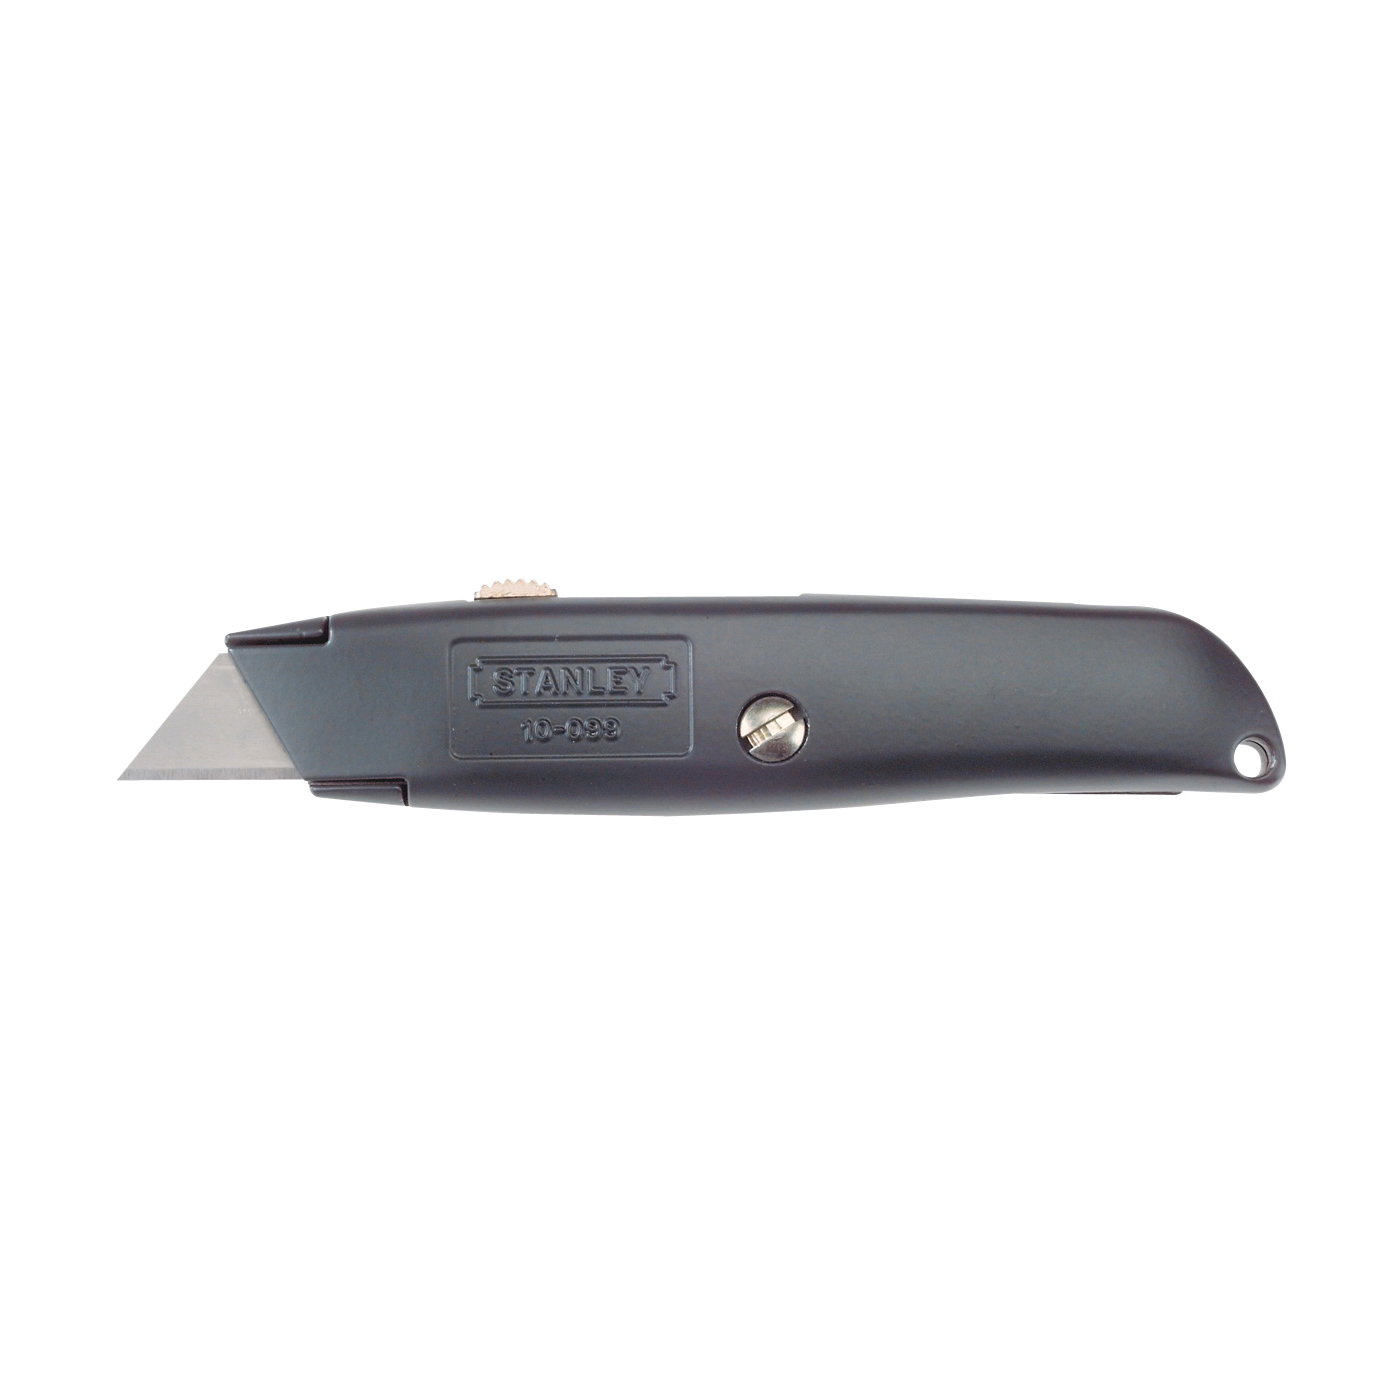 Stanley 6-1/8 in. Retractable Utility Knife